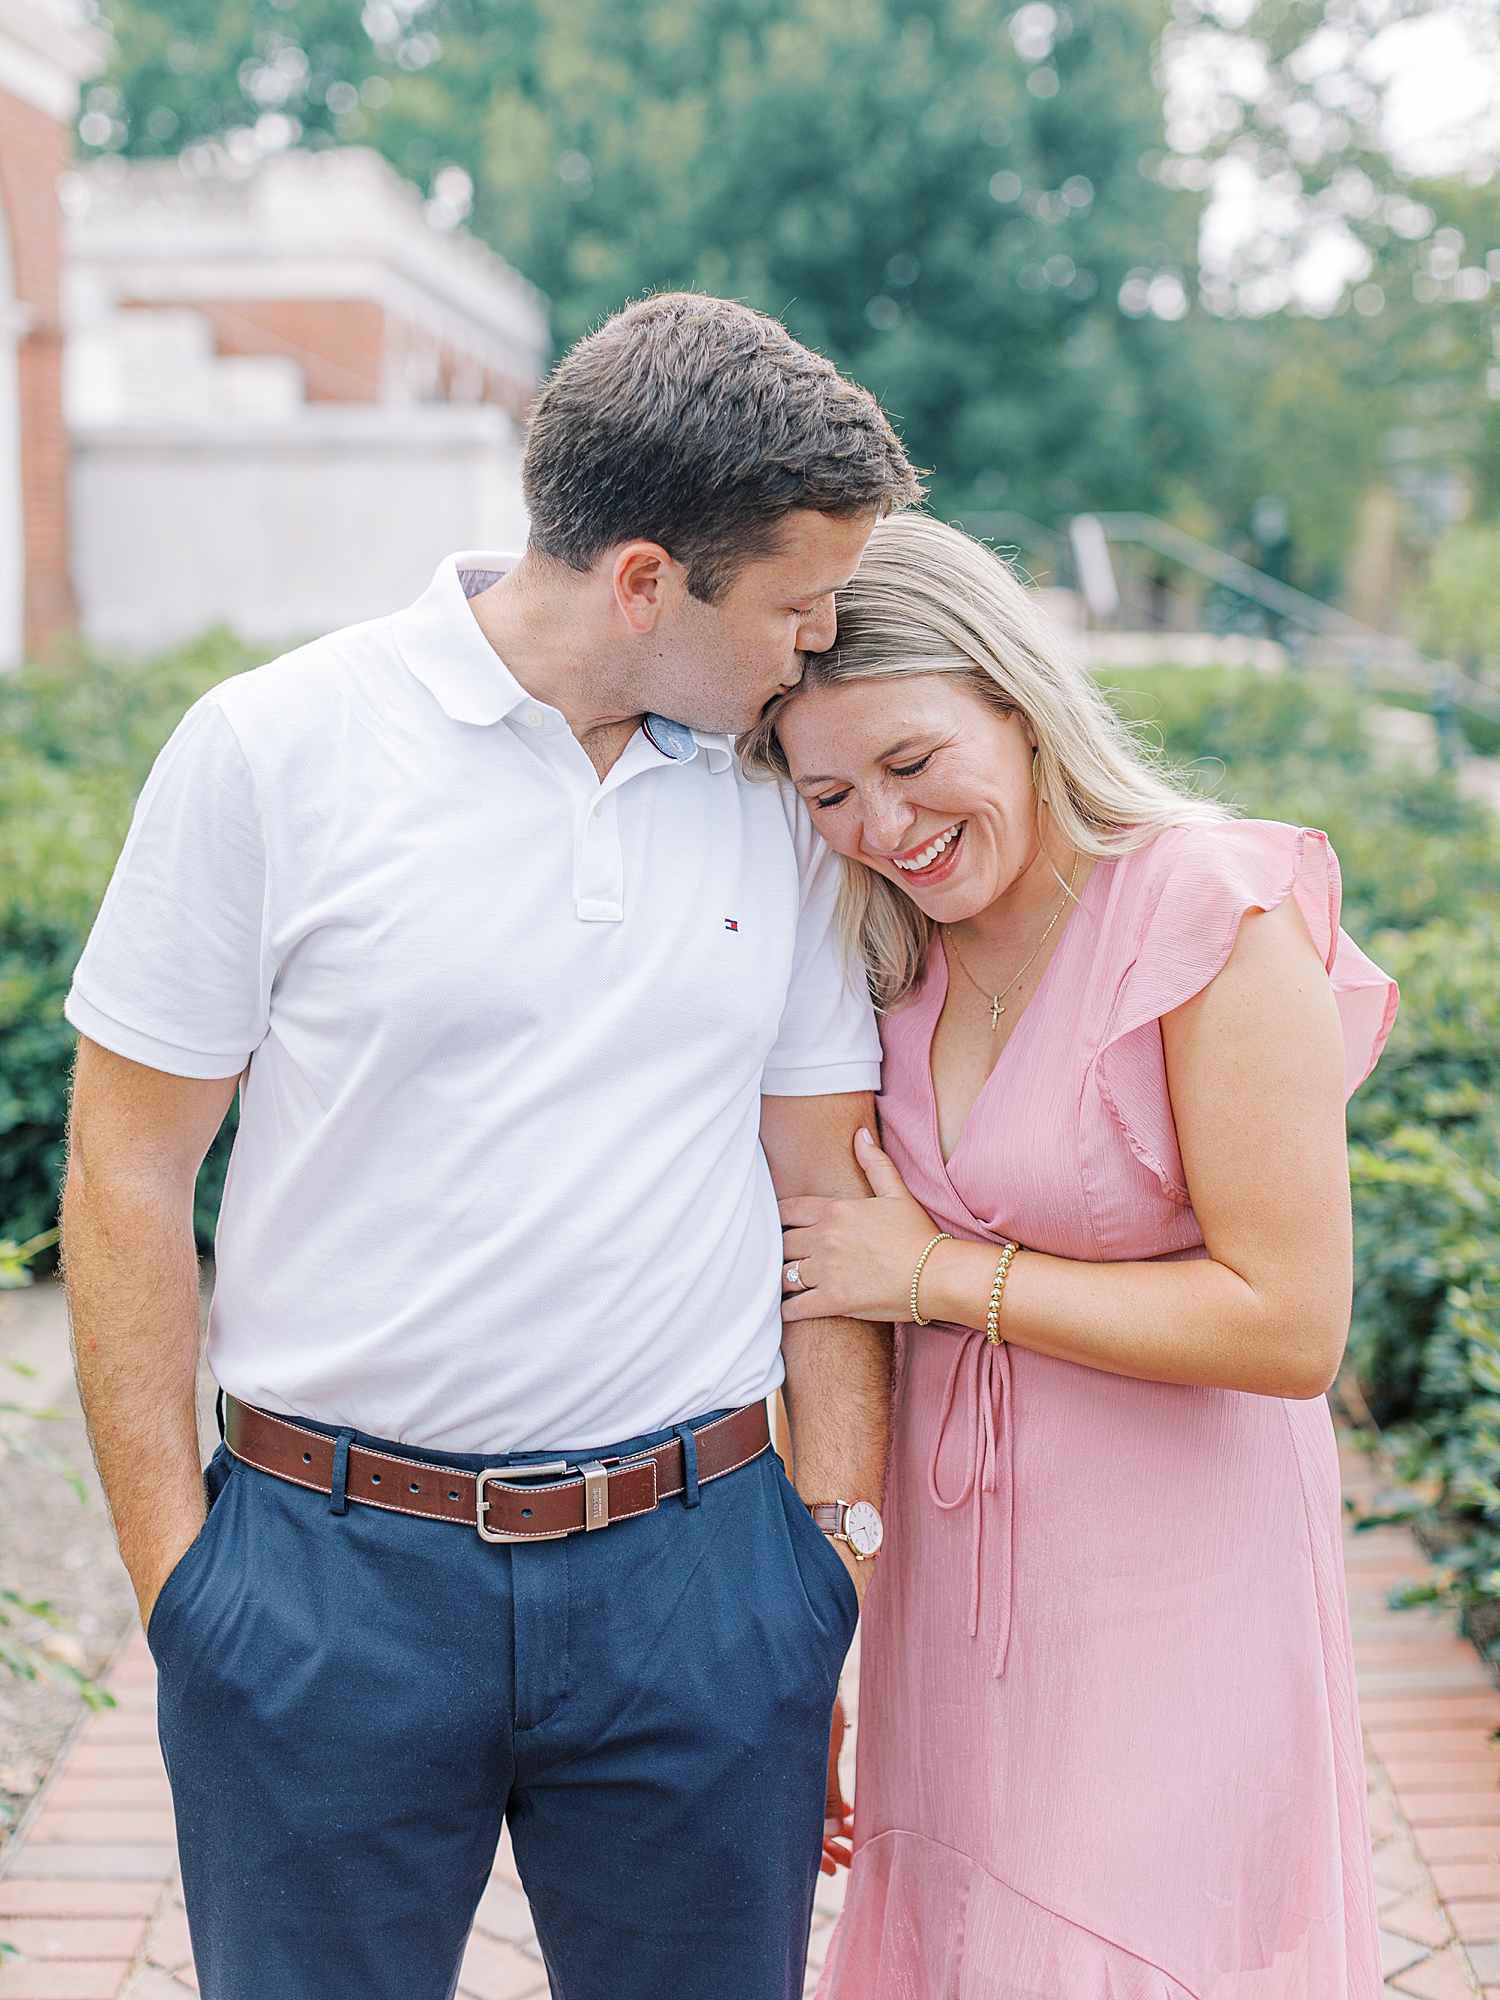 Man kissing fiancée’s forehead along the grounds at University of Virginia during engagement session. Photo taken by Charlottesville wedding photographer, Ashley Eagleson.